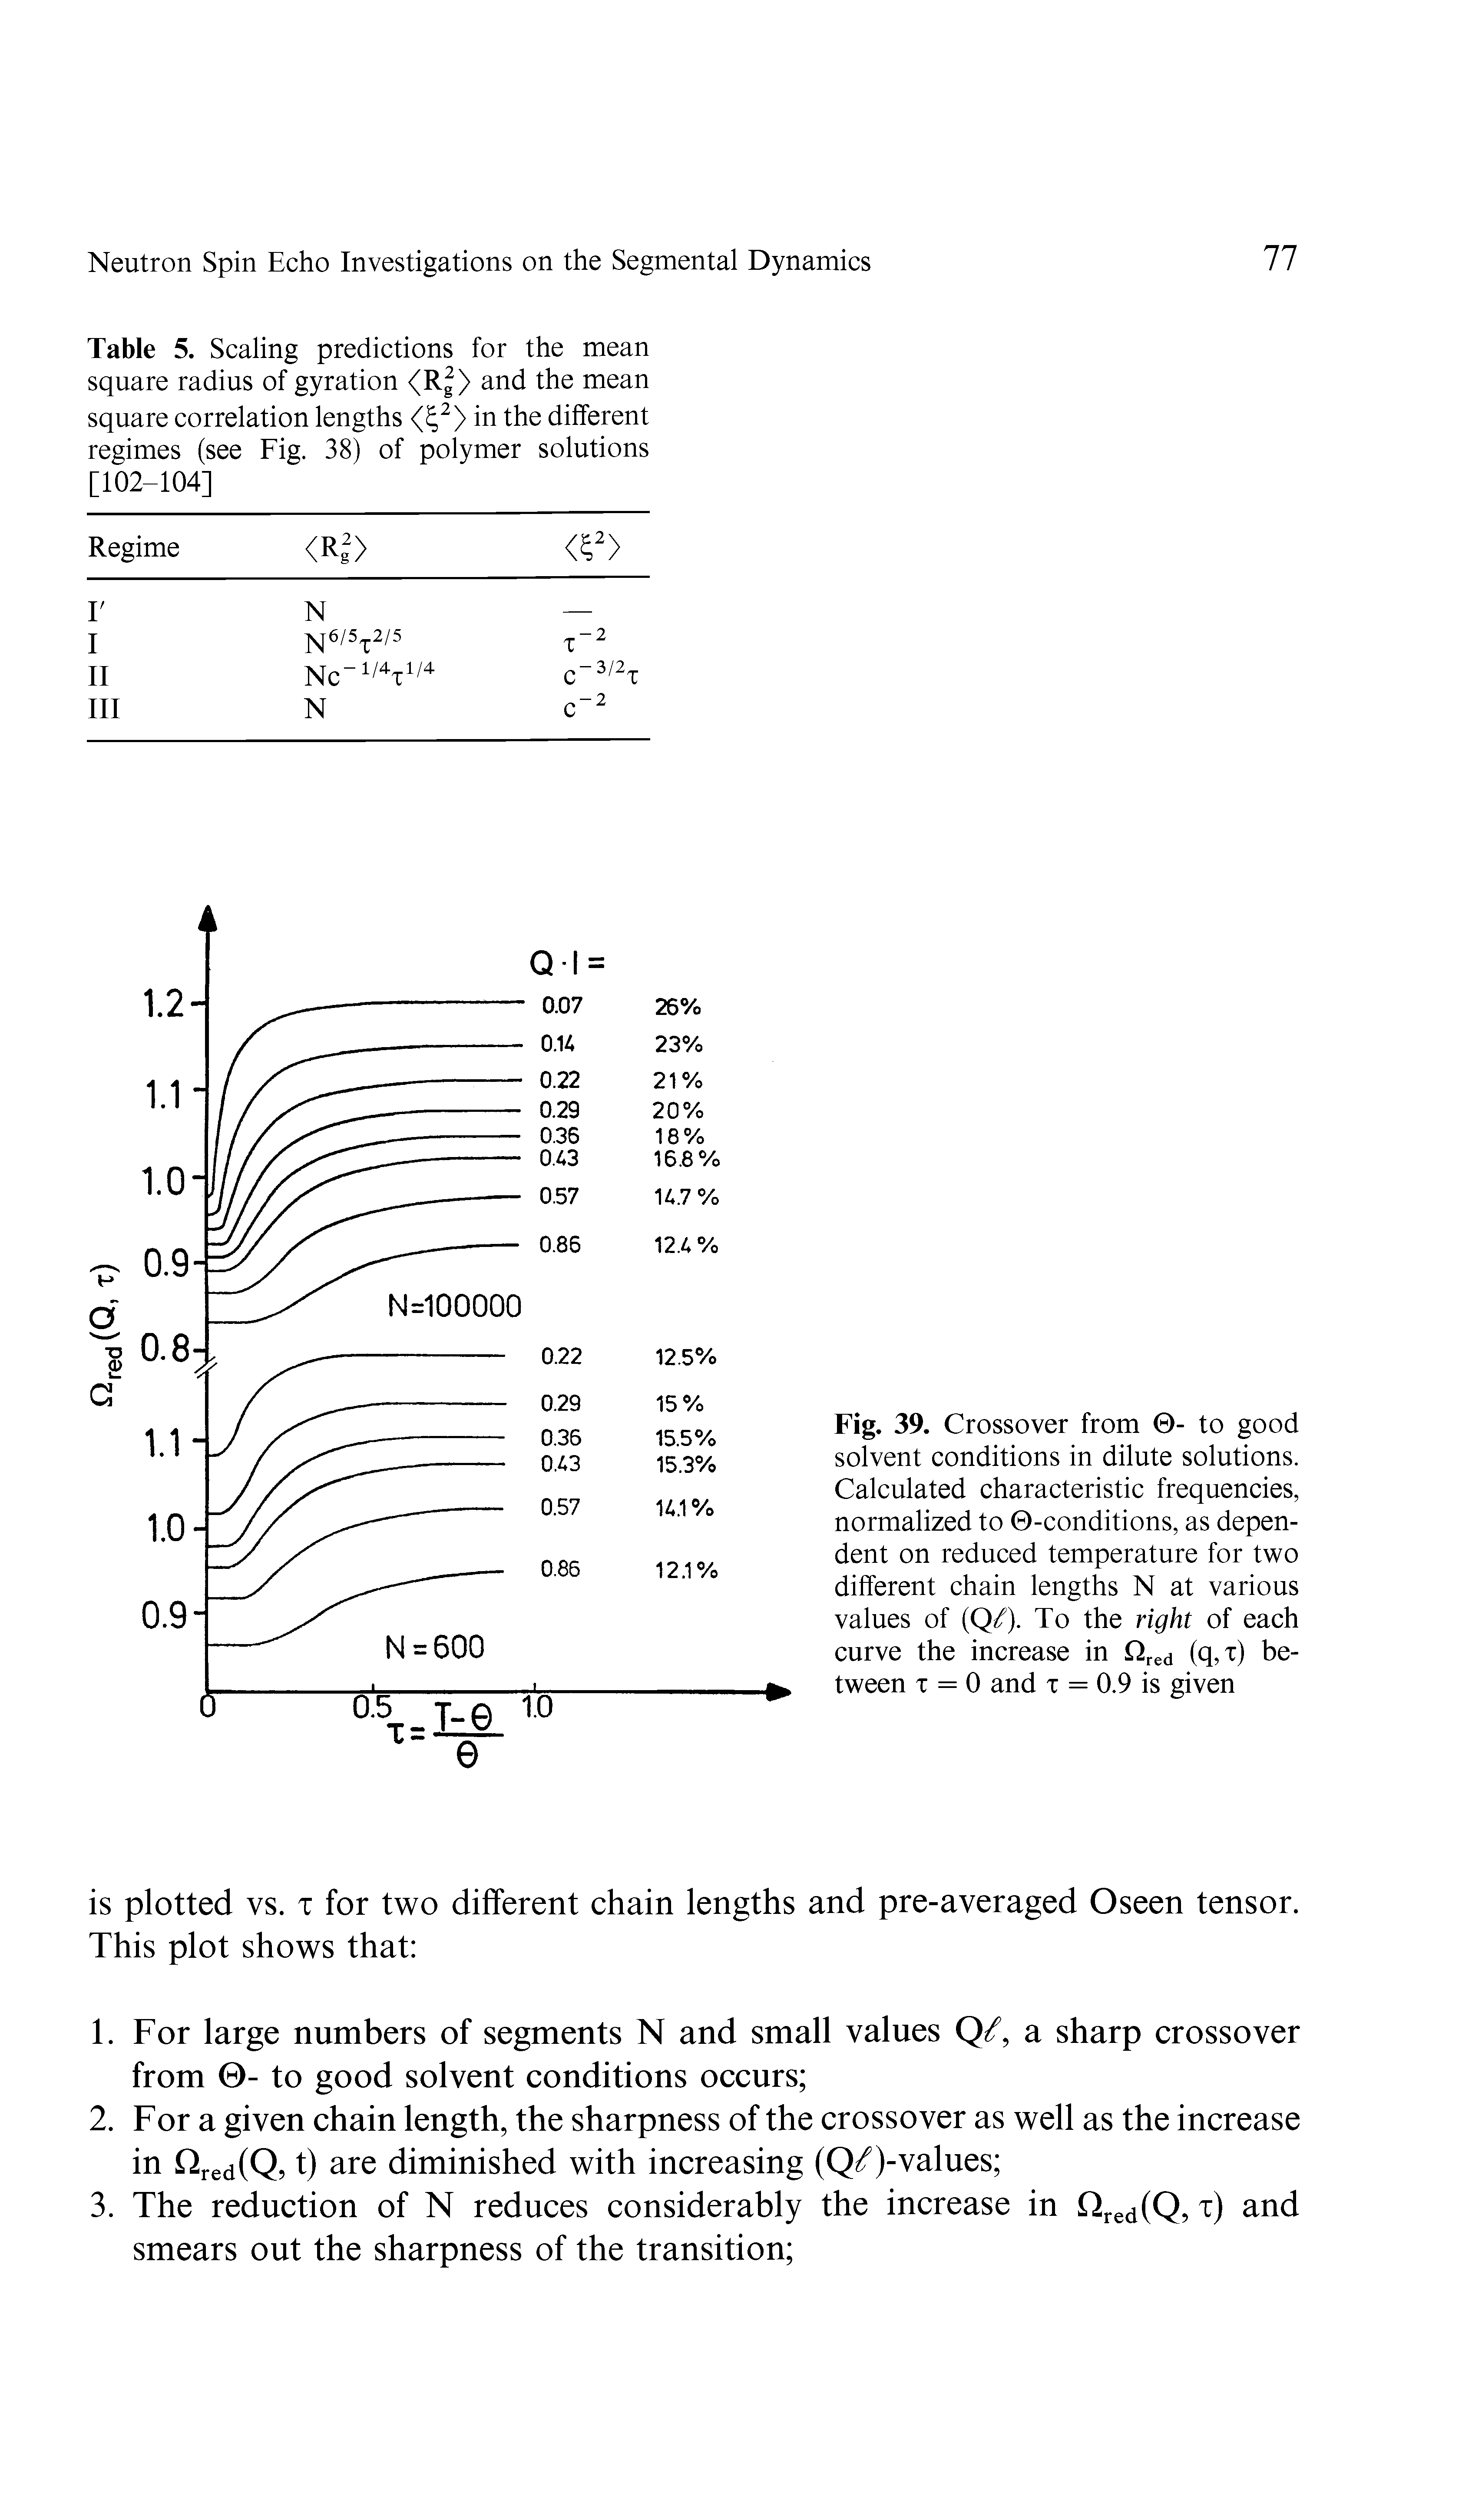 Fig. 39. Crossover from 0- to good solvent conditions in dilute solutions. Calculated characteristic frequencies, normalized to 0-conditions, as dependent on reduced temperature for two different chain lengths N at various values of (QS). To the right of each curve the increase in Qred (q,x) between t = 0 and t = 0.9 is given...